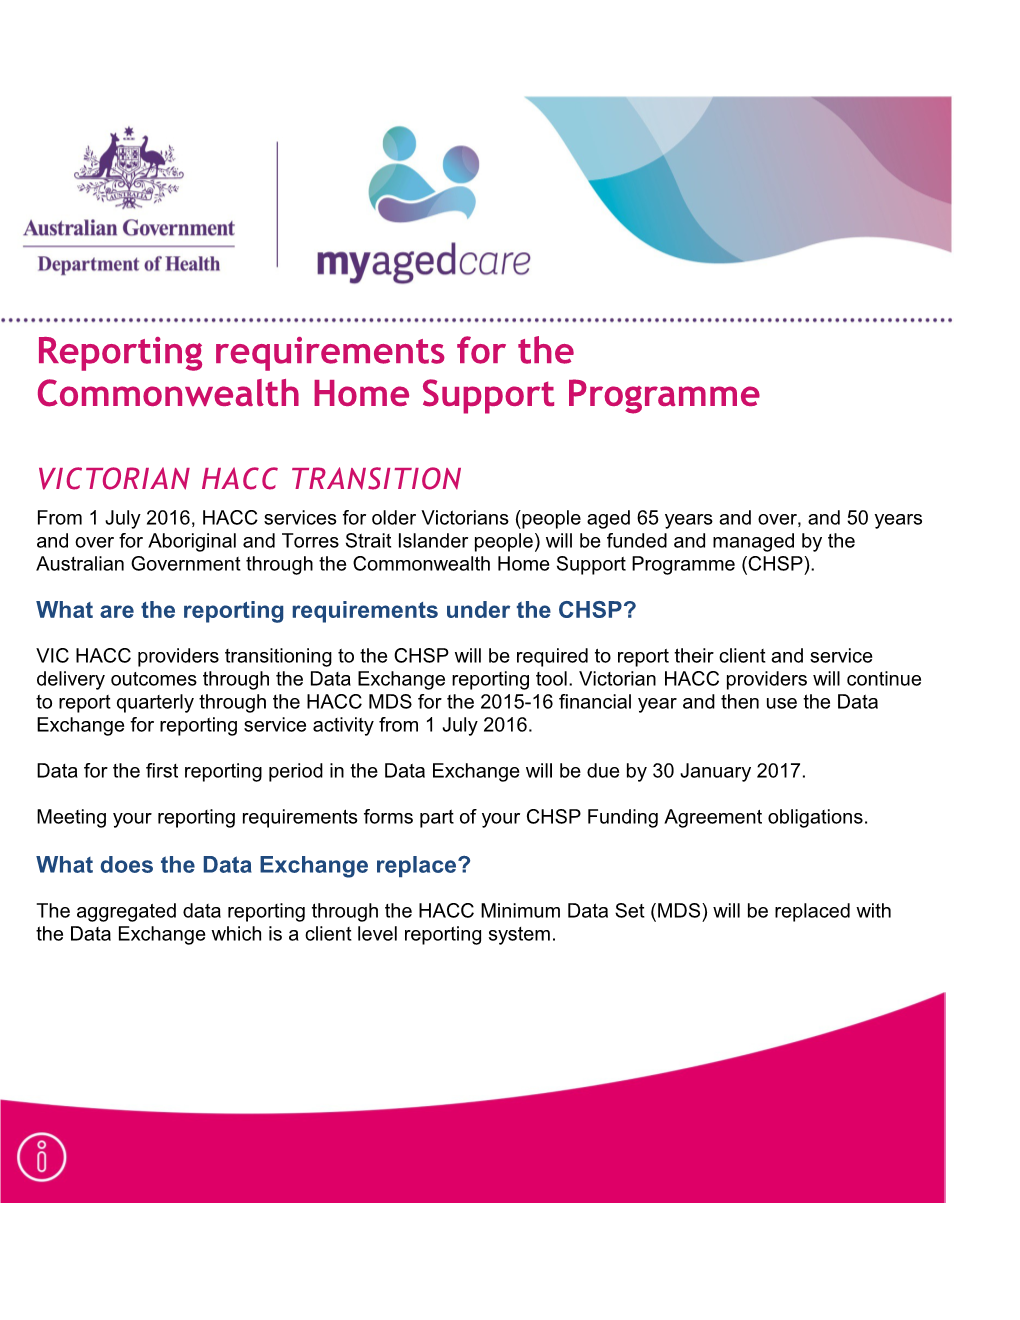 Reporting Requirements for the Commonwealth Home Support Programme